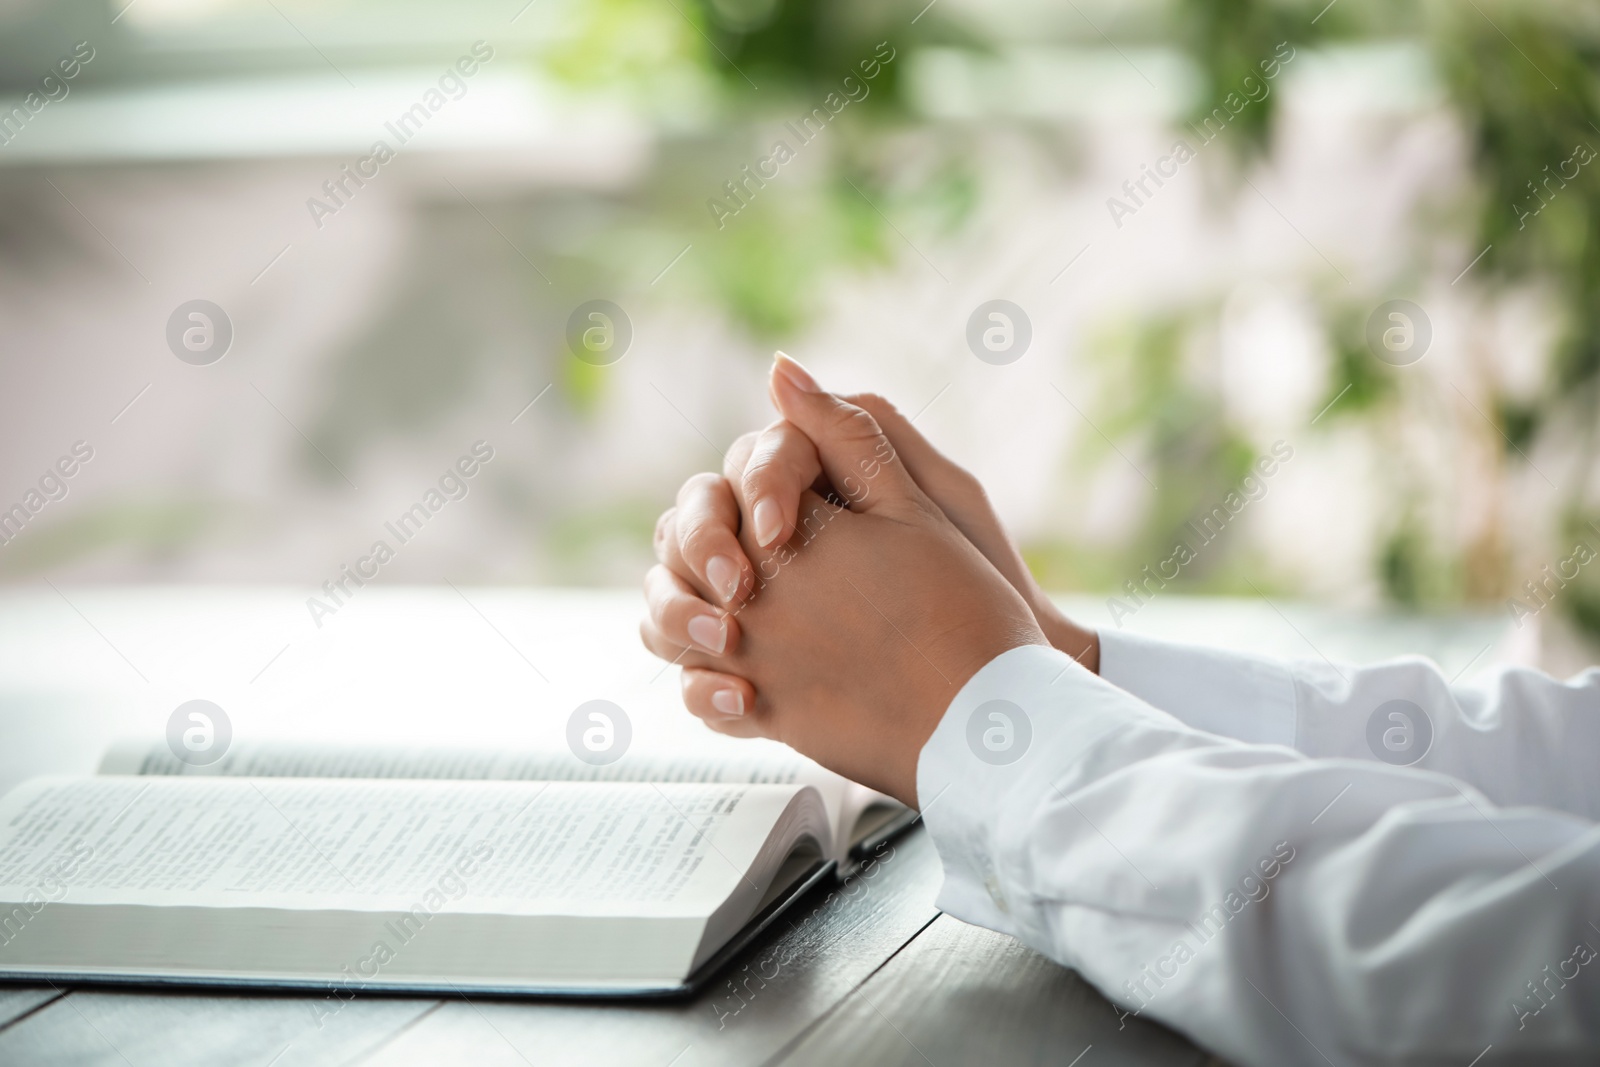 Photo of Woman holding hands clasped while praying at grey wooden table with Bible, closeup